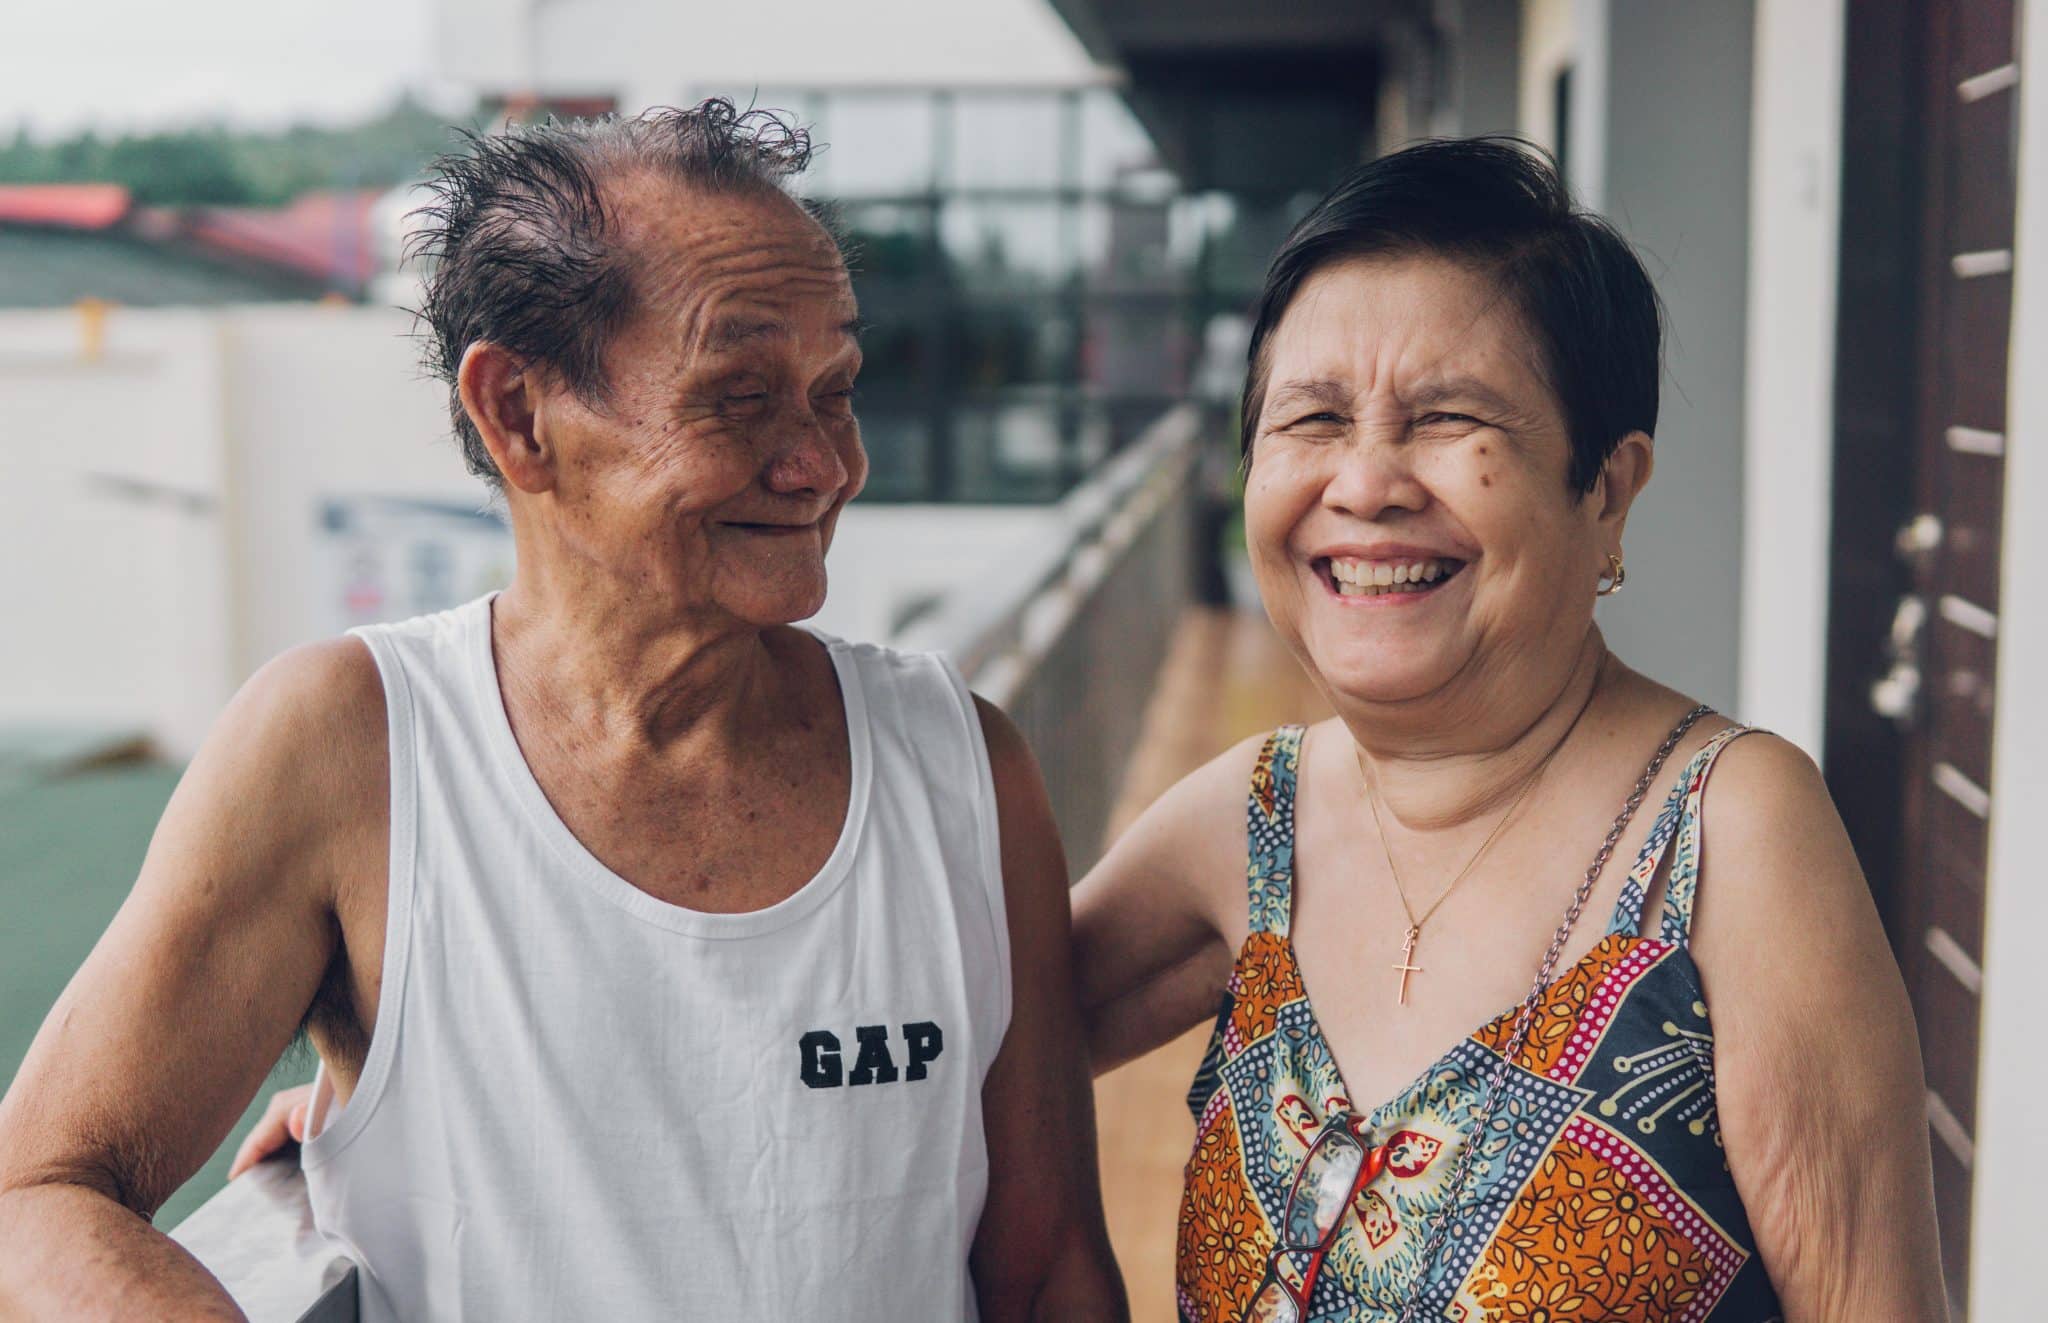 How can we challenge the stigma, fear and hopelessness of dementia? Can faith renew hope for persons living with dementia and their caregivers? Photo by Deedee Geli on Pexels.